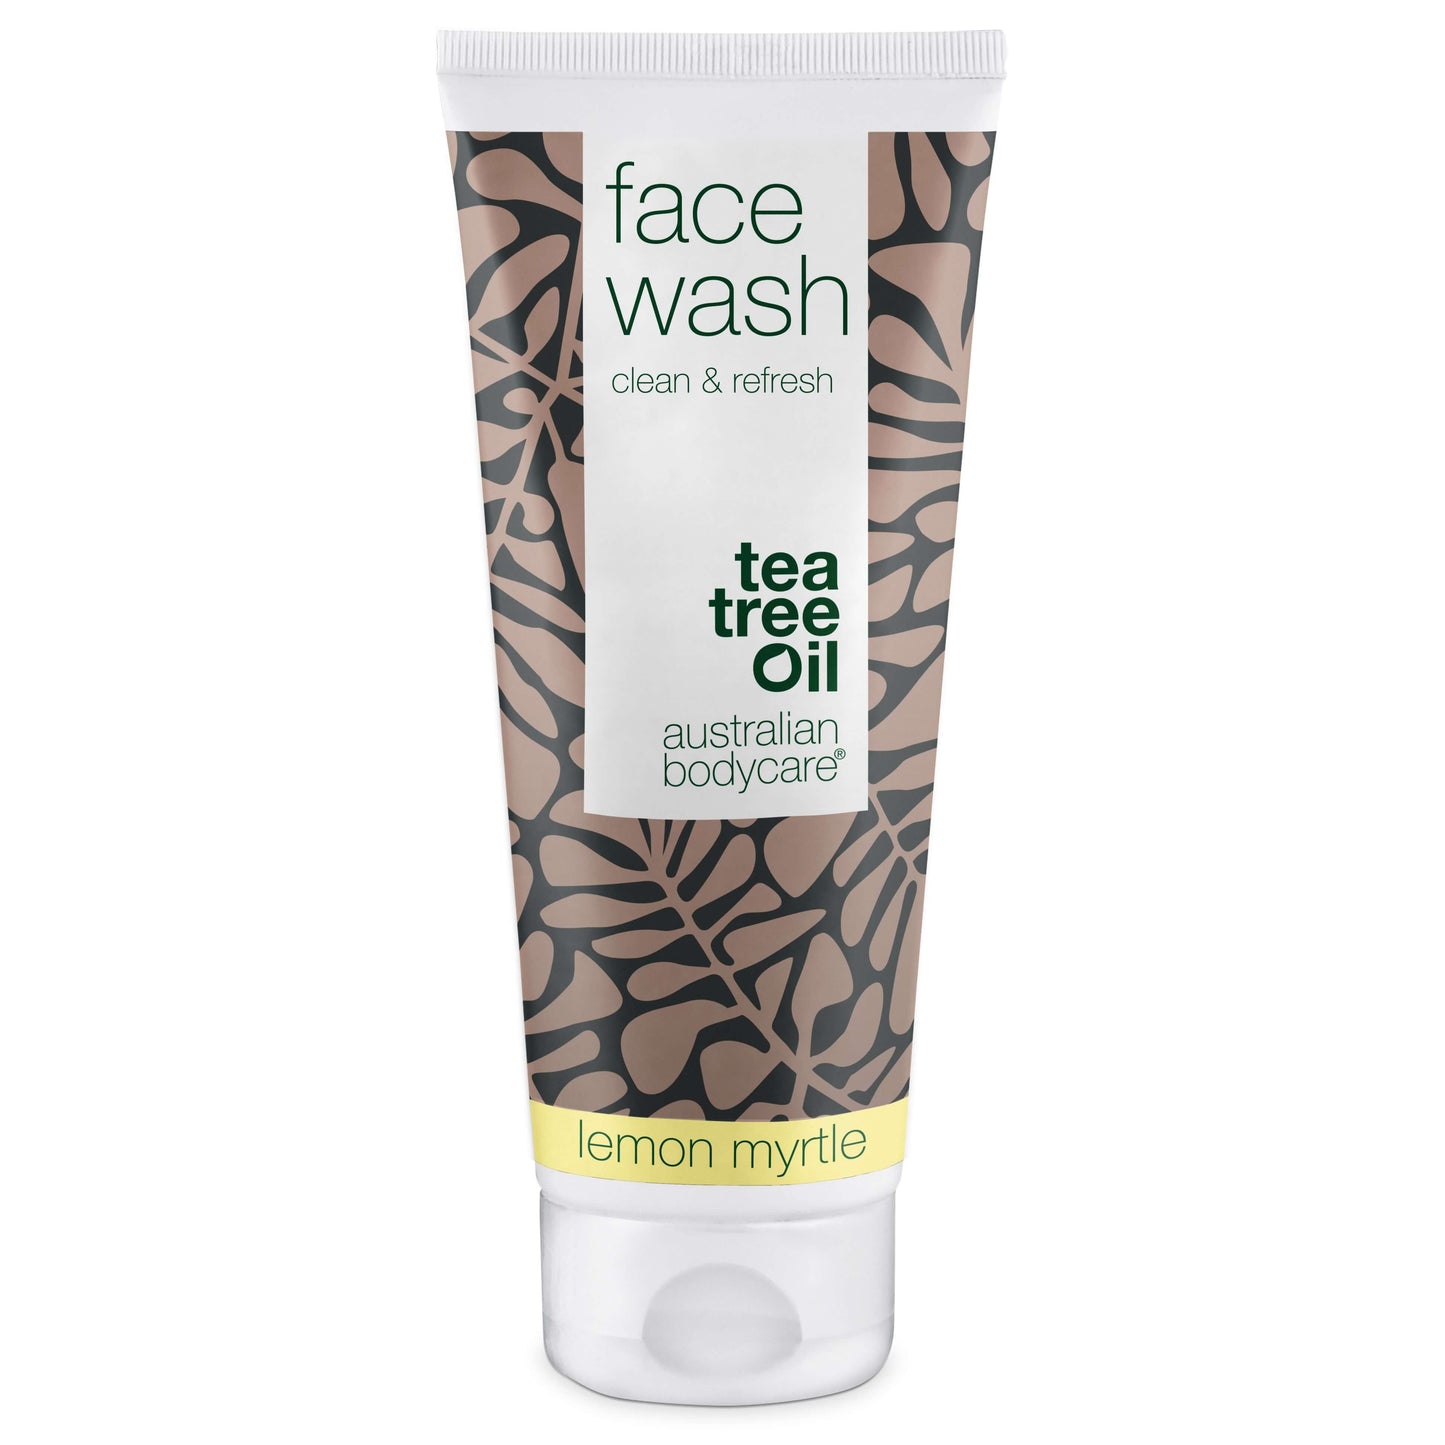 Tea tree Face Wash for pimples and blackheads - Daily face cleanser for oily skin, ideal for blemished skin and acne